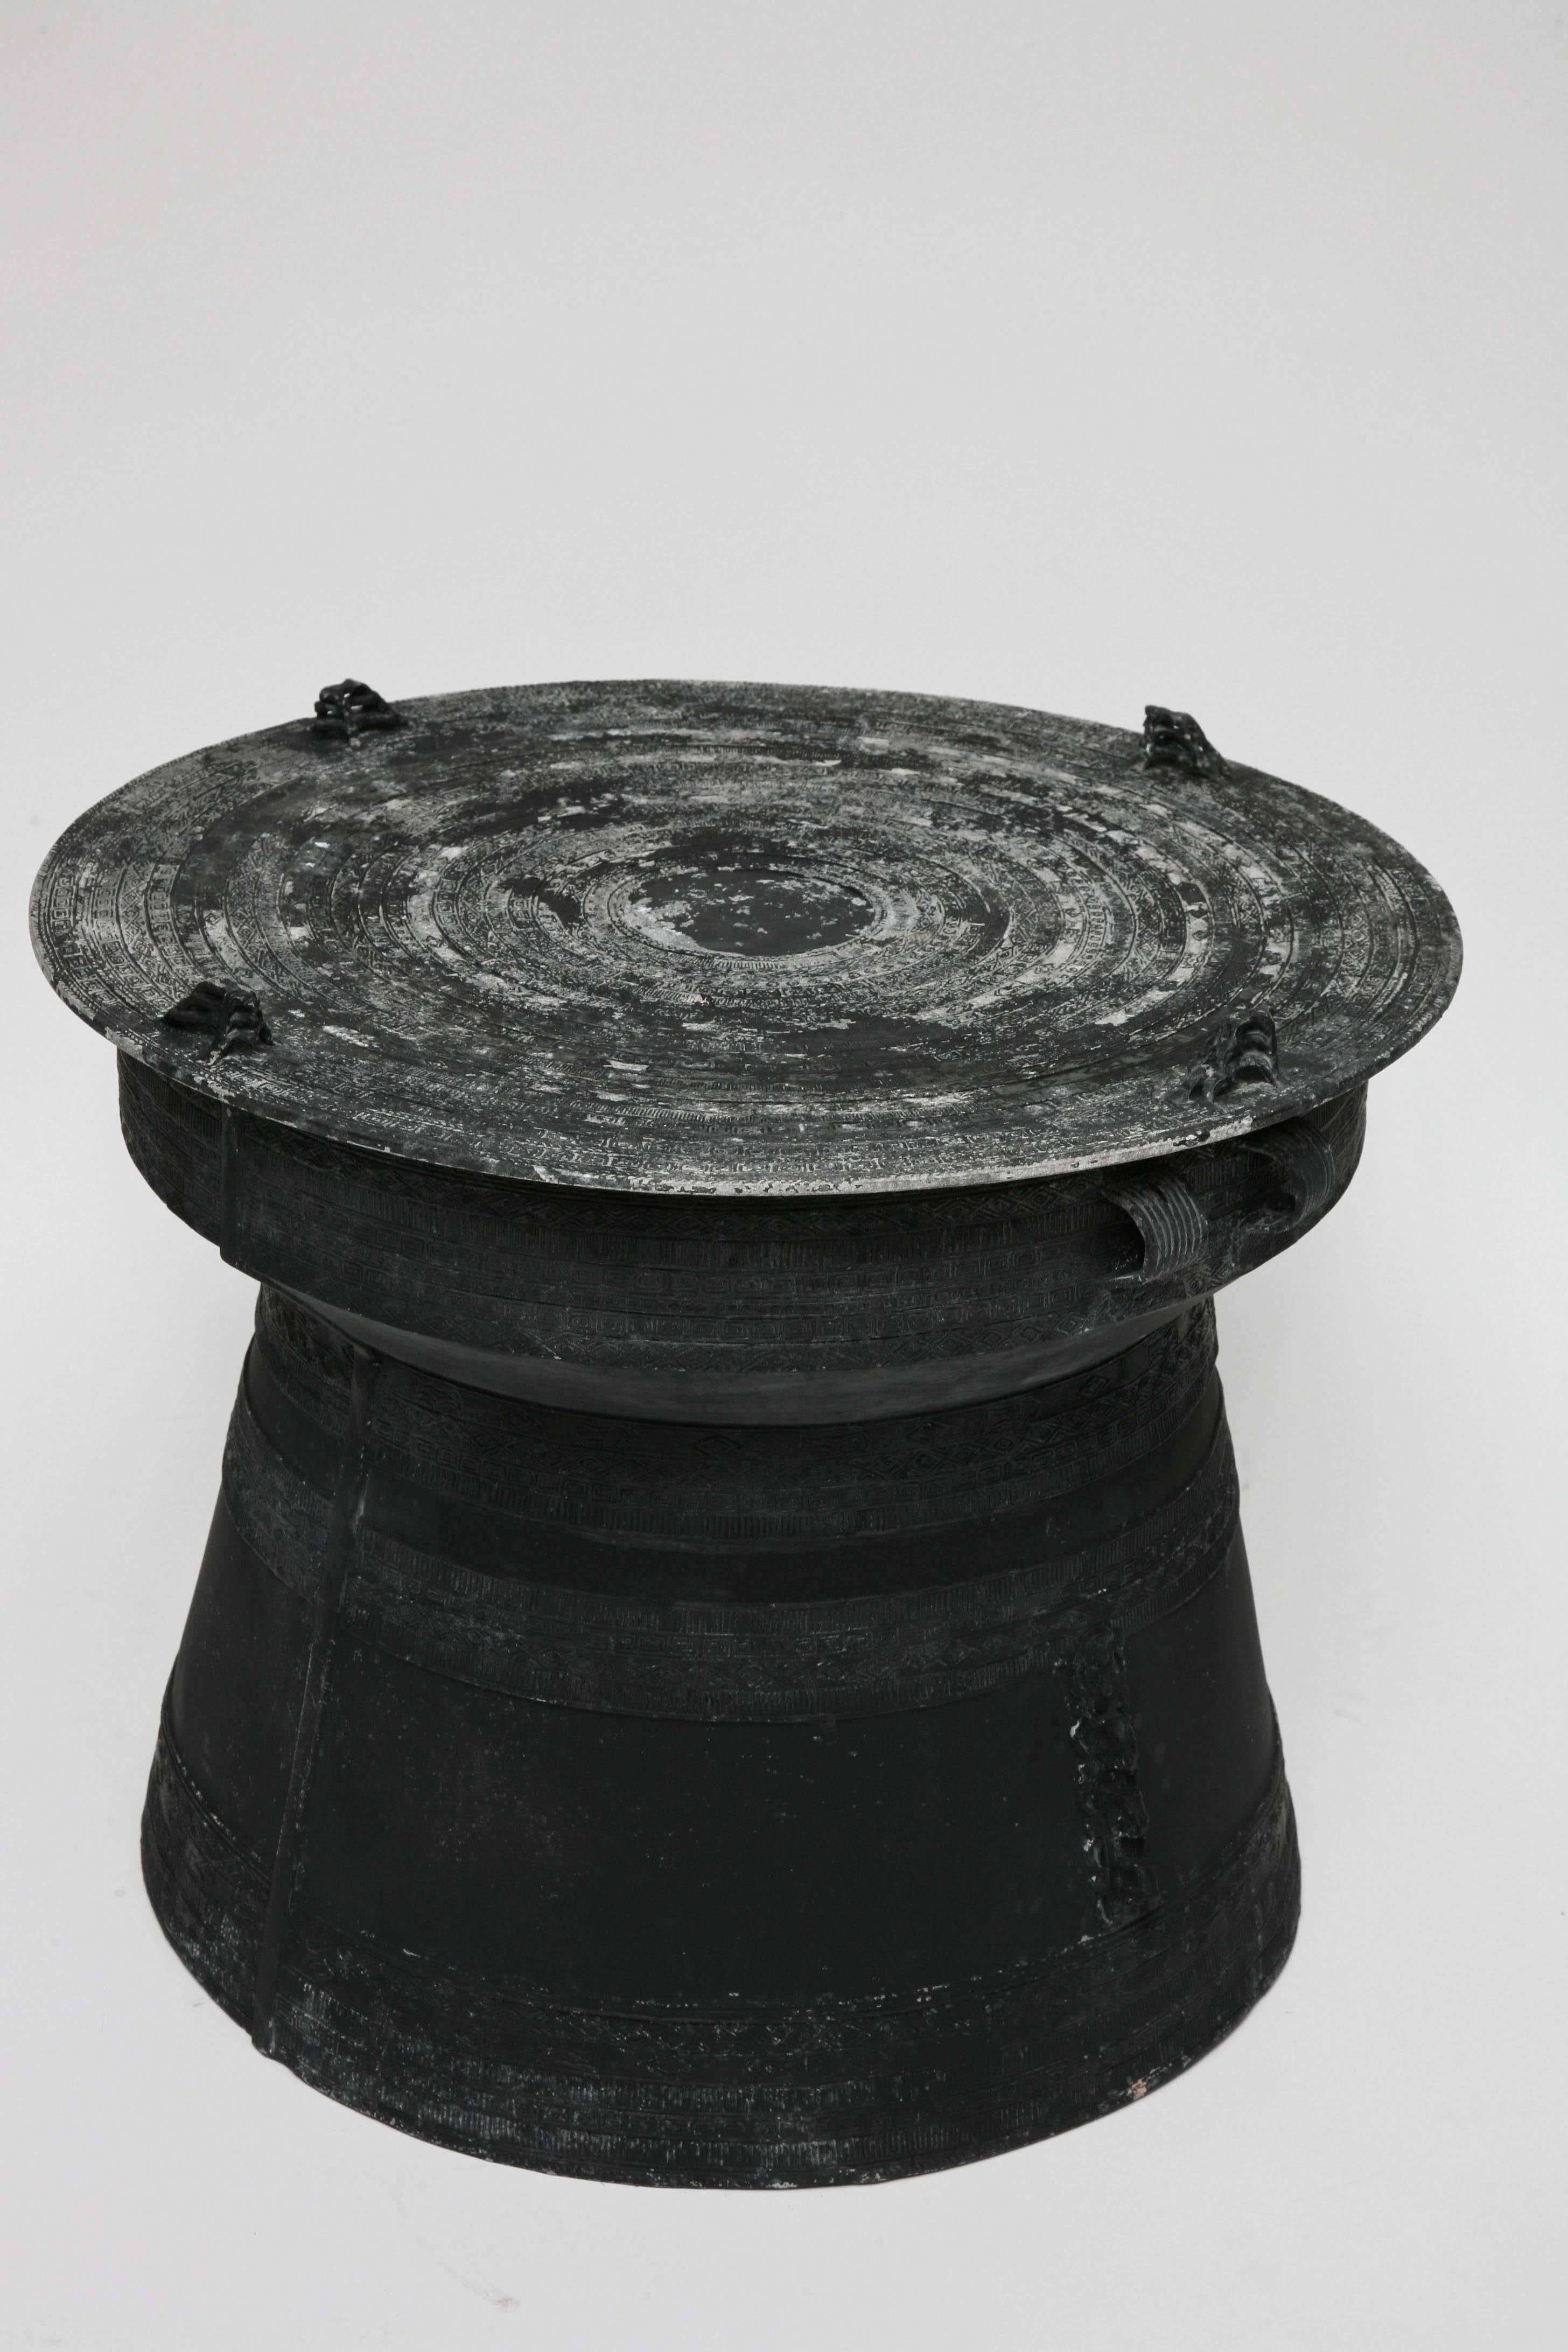 Modeled after traditional bronze rain drums from Thailand, this thoroughly engaging black-painted, cast aluminum version is made all the more interesting by its naturally distressed finish. We love it just as it is (and would probably bring it out